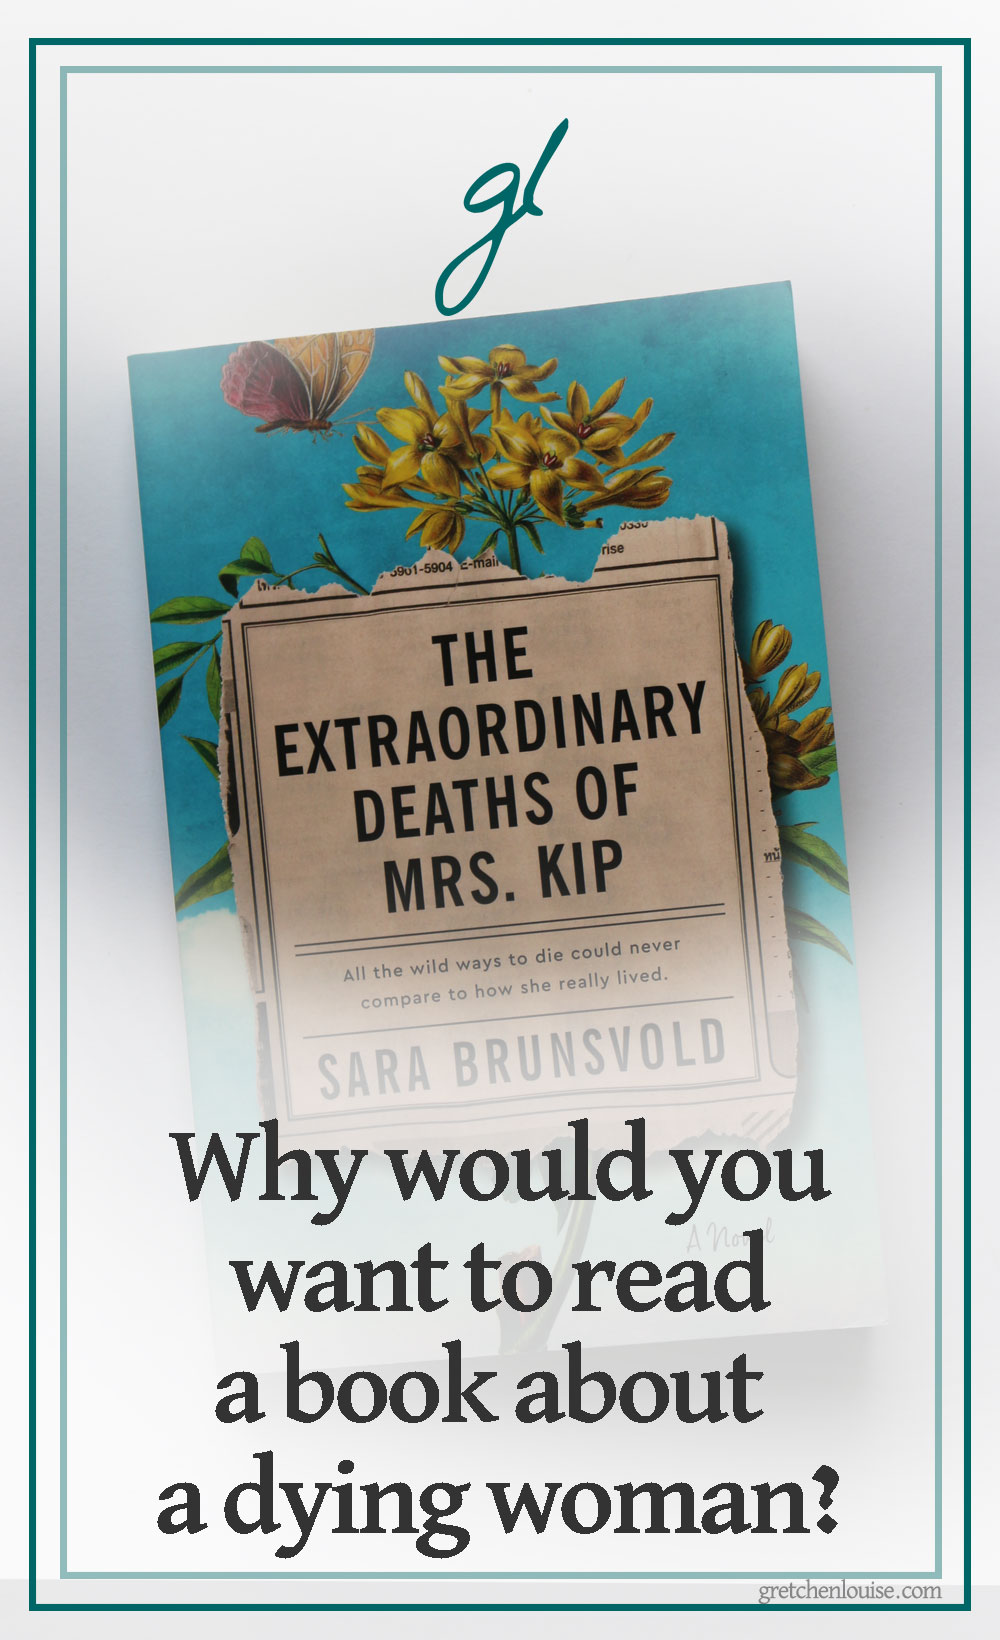 Why would you want to read a book about a dying woman? via @GretLouise